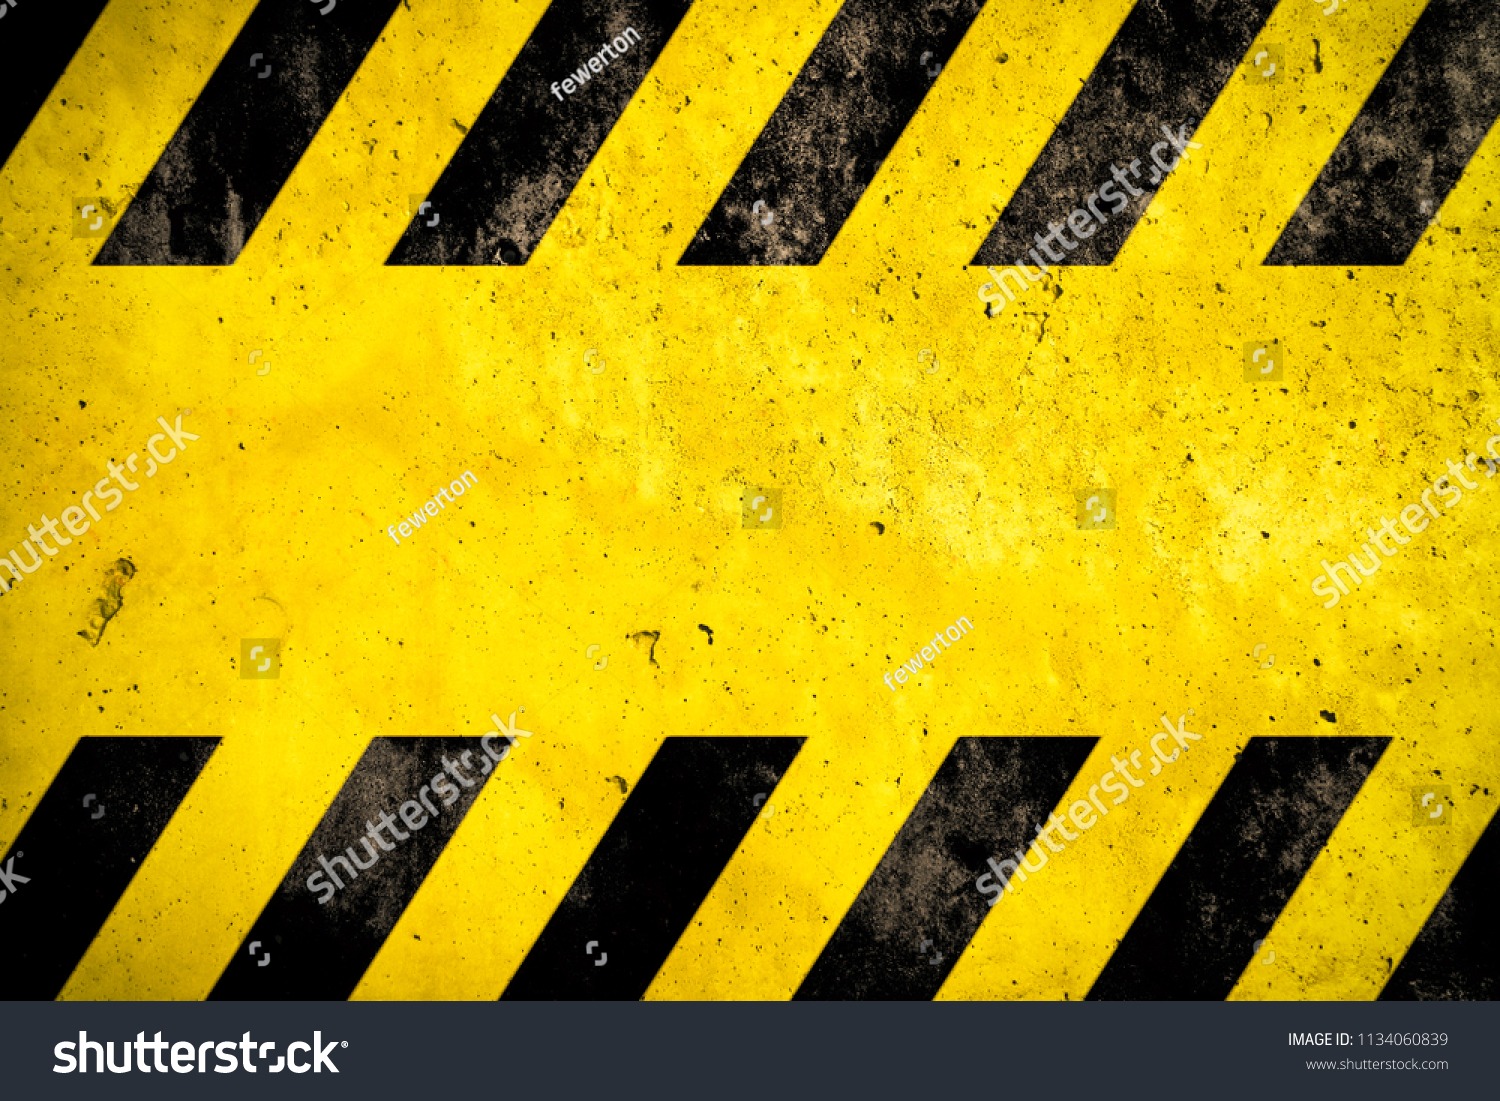 Warning danger background with yellow and black stripes painted over yellow concrete wall facade texture and empty space for text message in the middle. Concept image for caution, danger and hazard. #1134060839